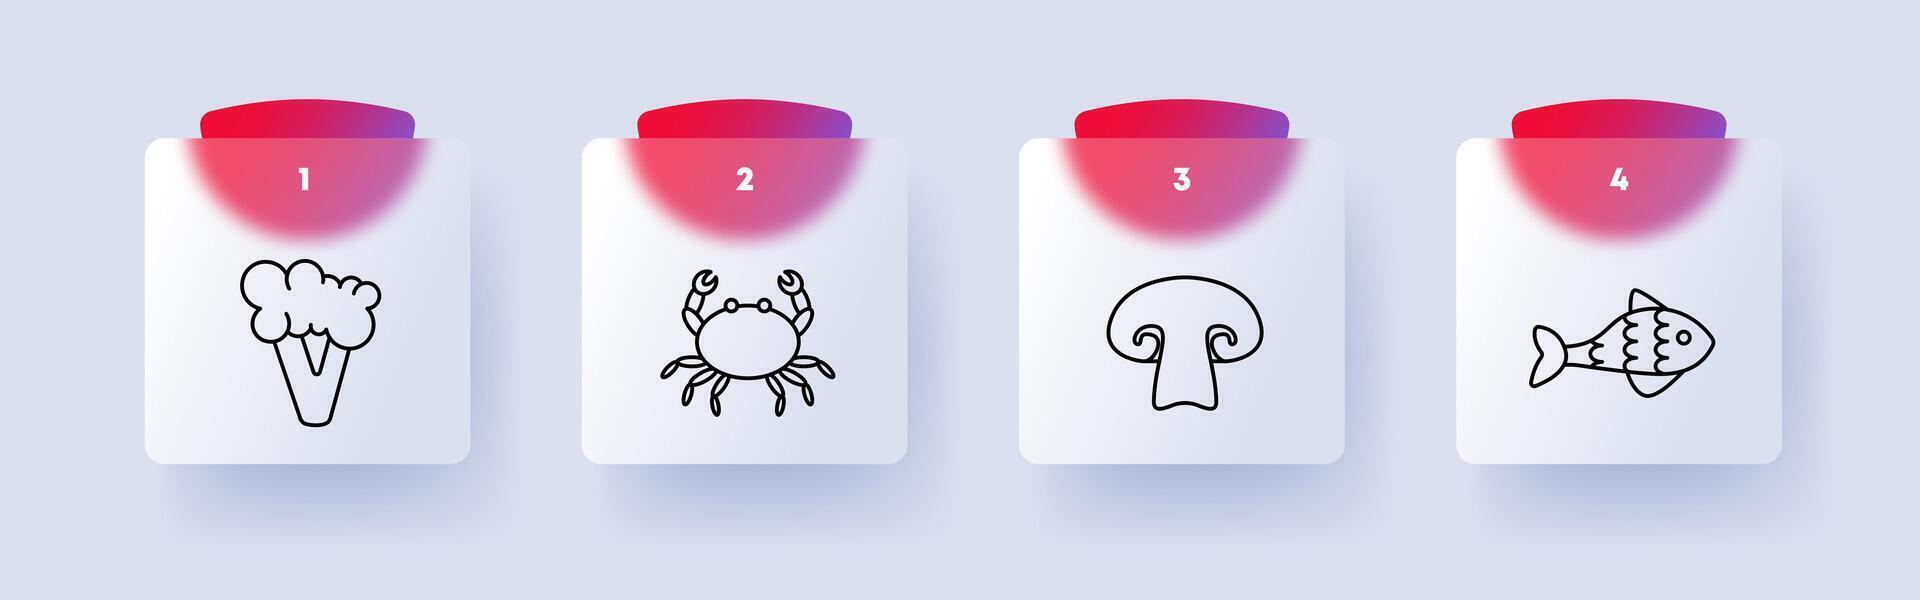 Products set icon. Fish, crab, seafood, cut mushroom, broccoli, delicacy, unusual food, scales, fins, health care, diet, numbering. Healthy eating concept. Glassmorphism style. vector